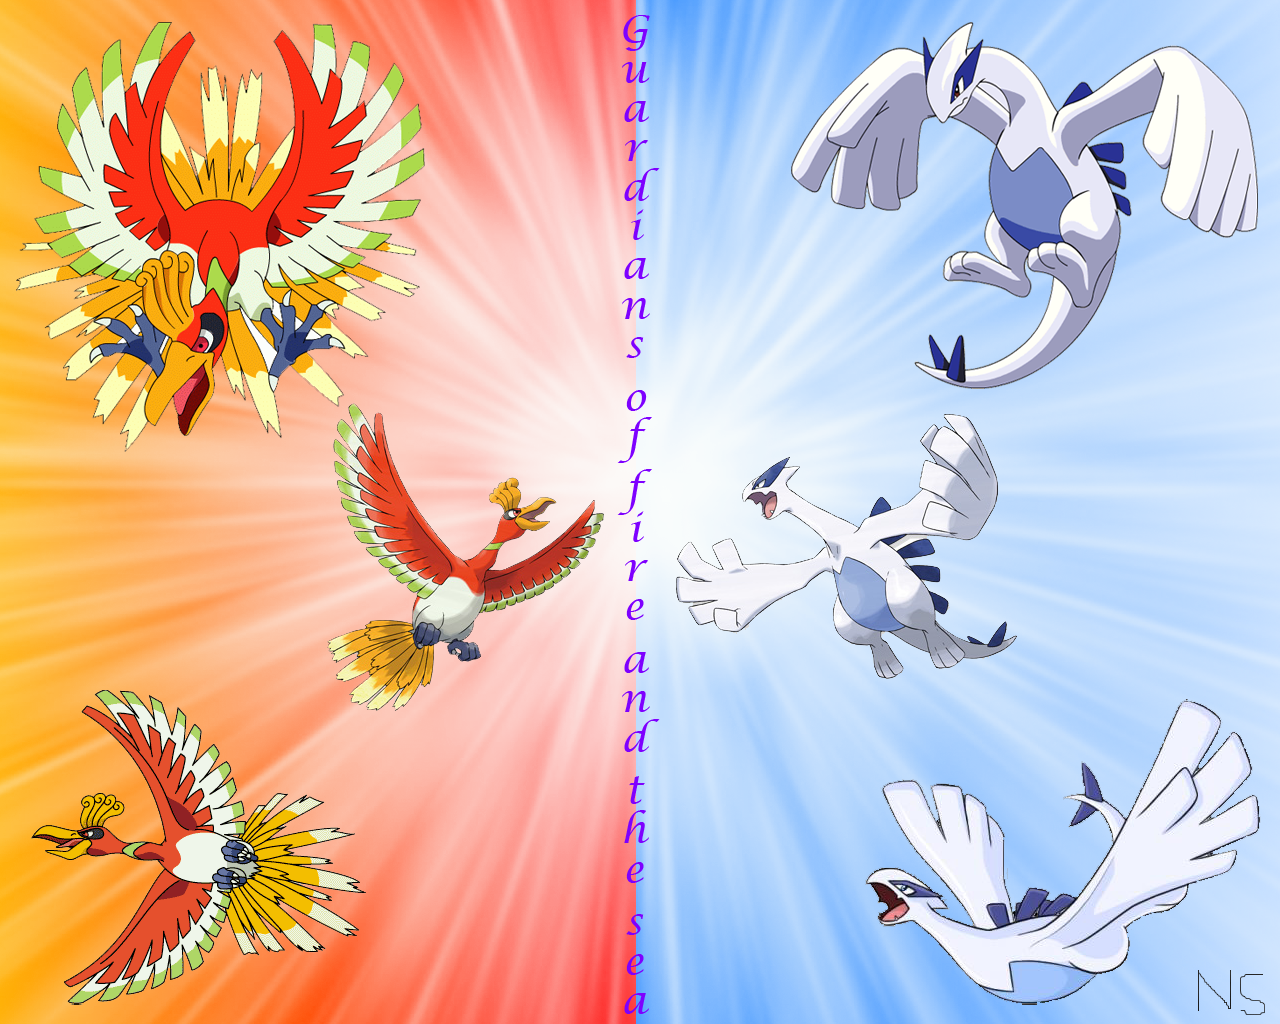 Pokemon Pictures: Epic Ho-Oh and Lugia Wallpaper Legendary